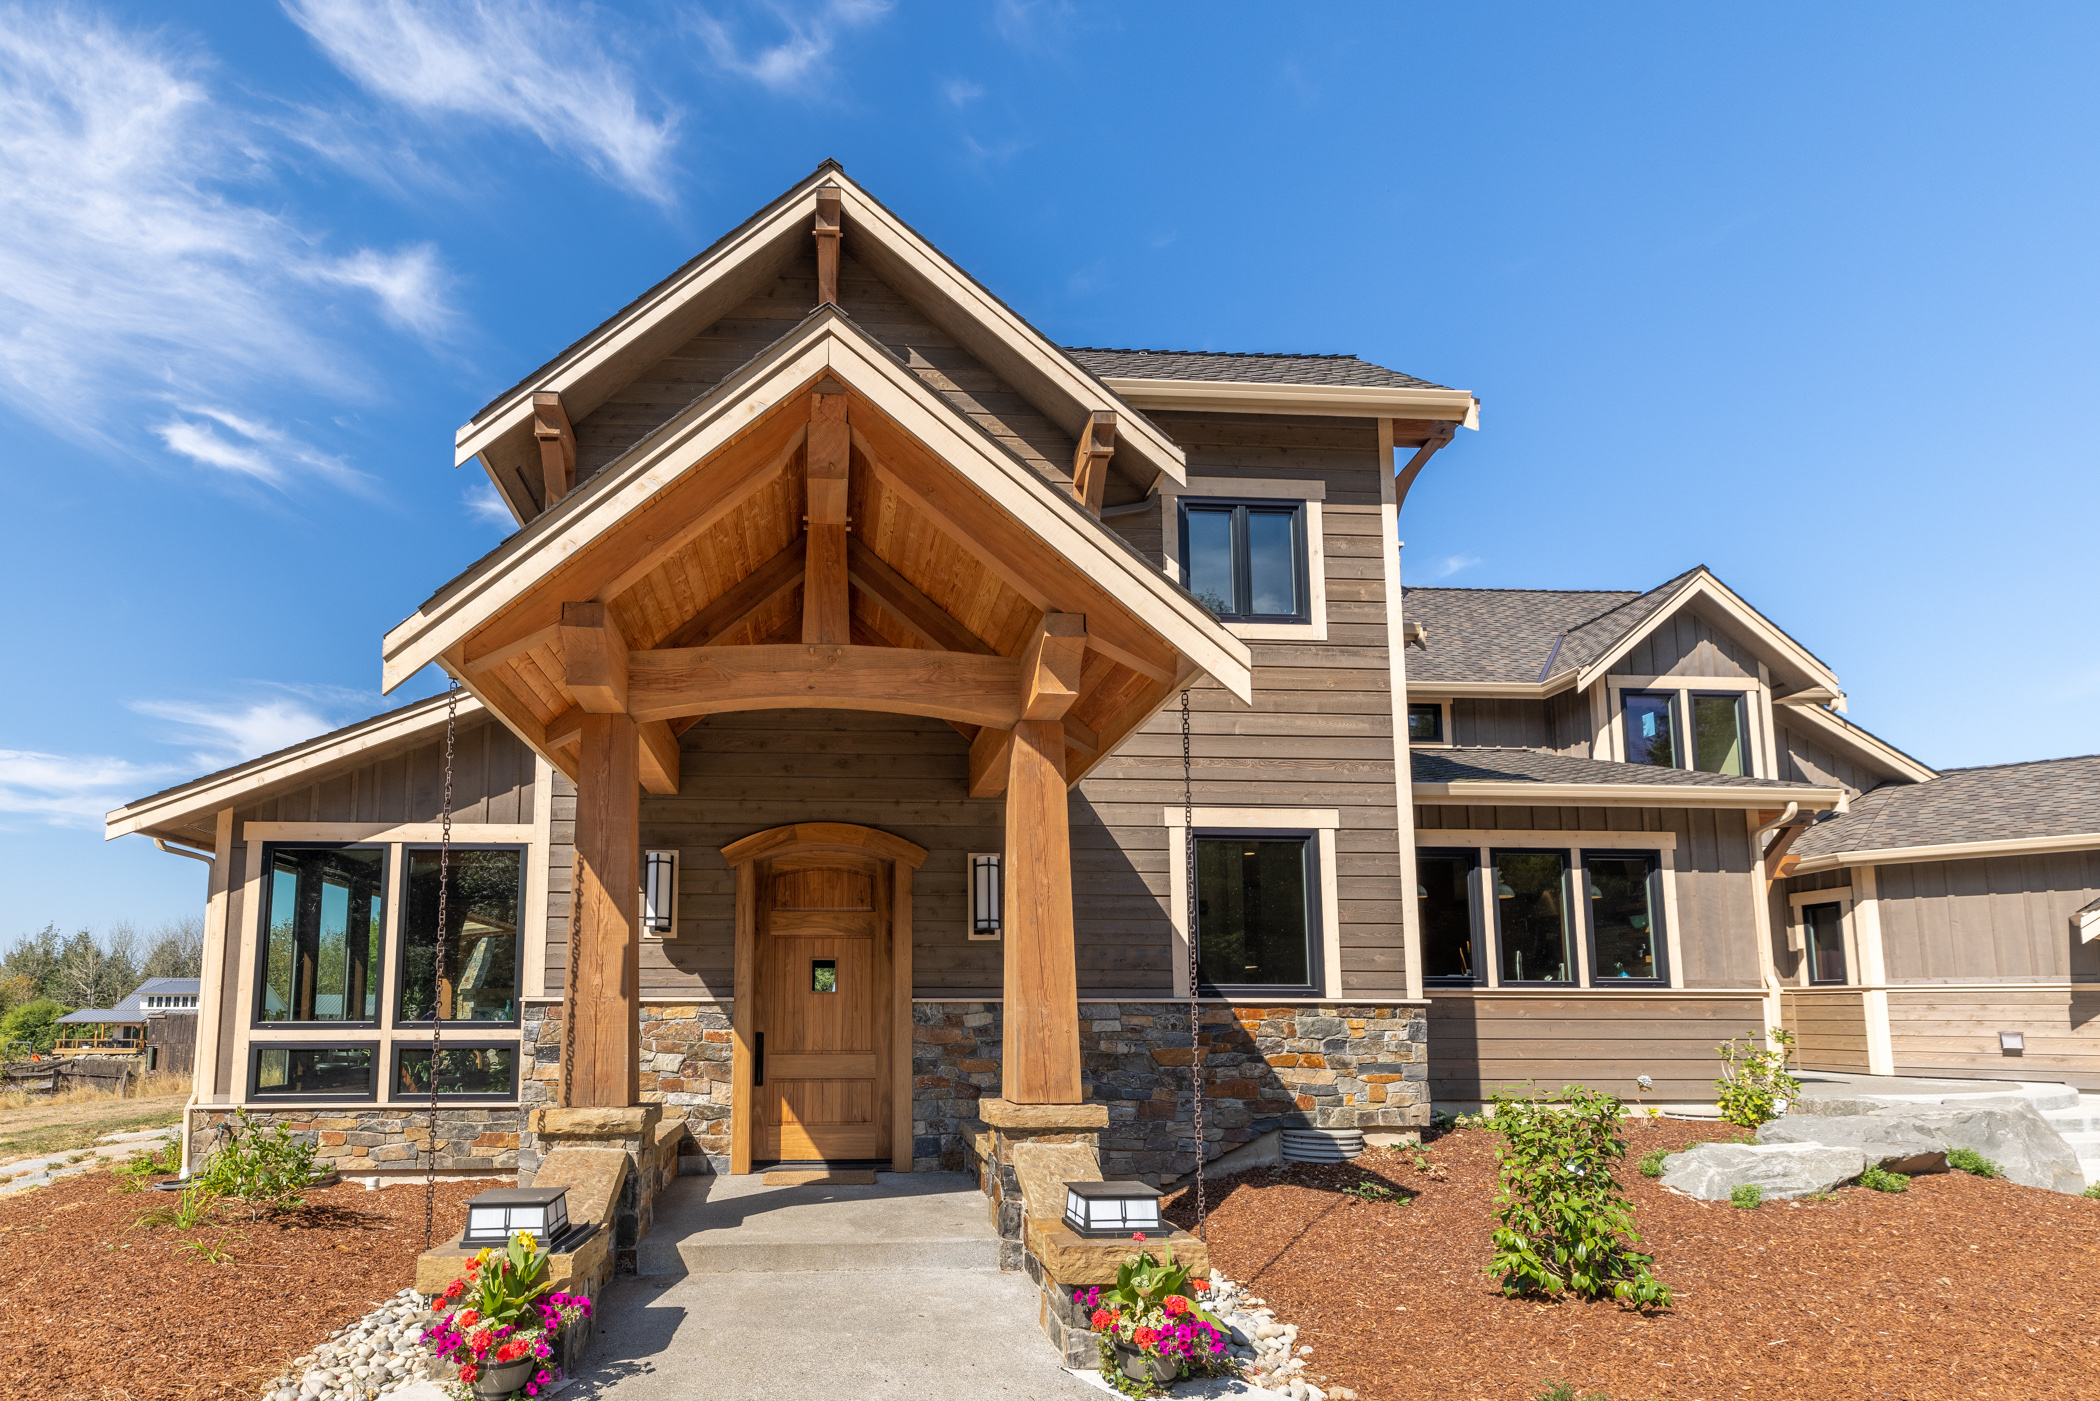 Craftsman - Classic - Rustic Hybrid Timber Frame Home